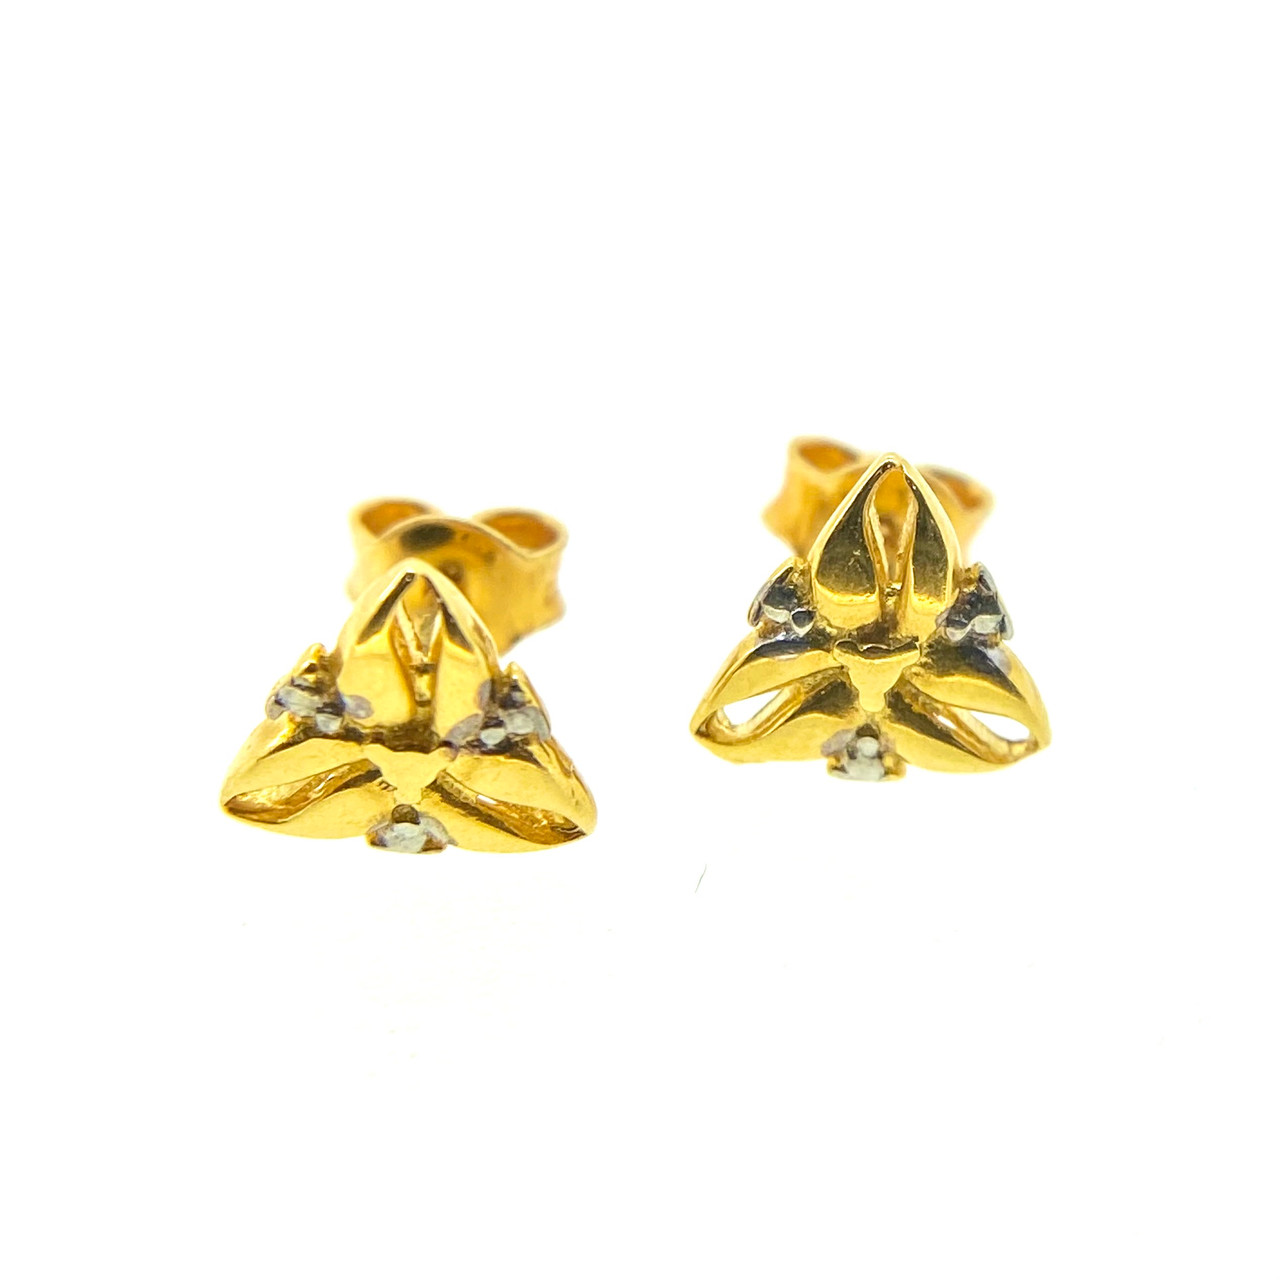 22K Gold Earrings With Cz for Baby - 235-GER11206 in 2.850 Grams